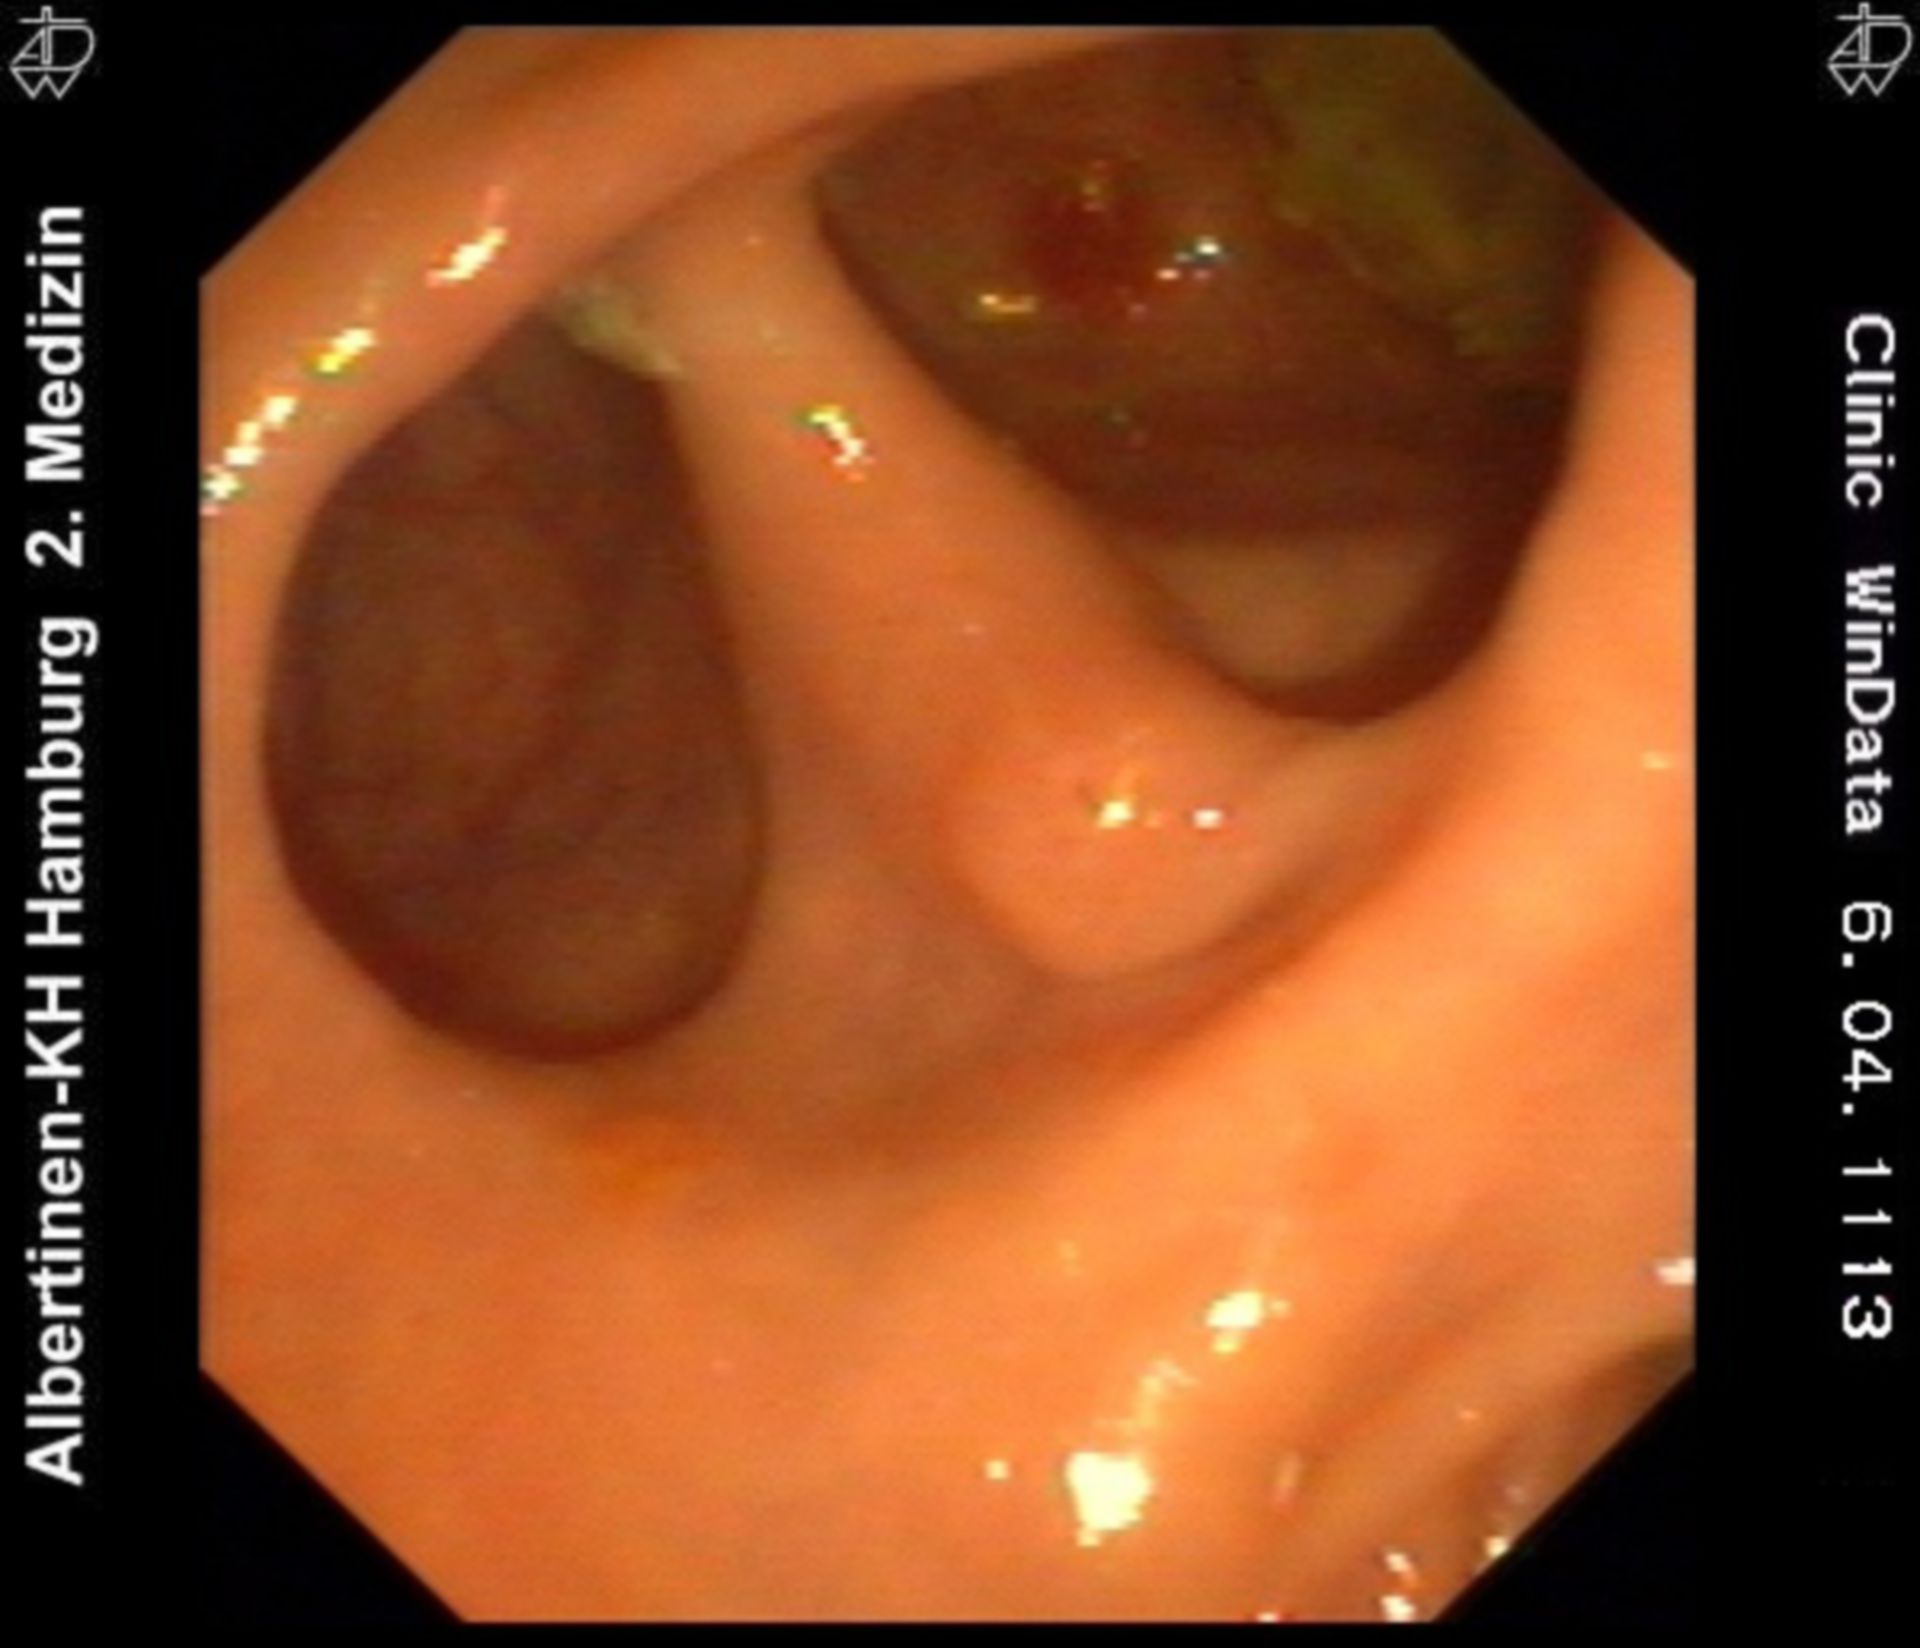 Double diverticulum at the papilla